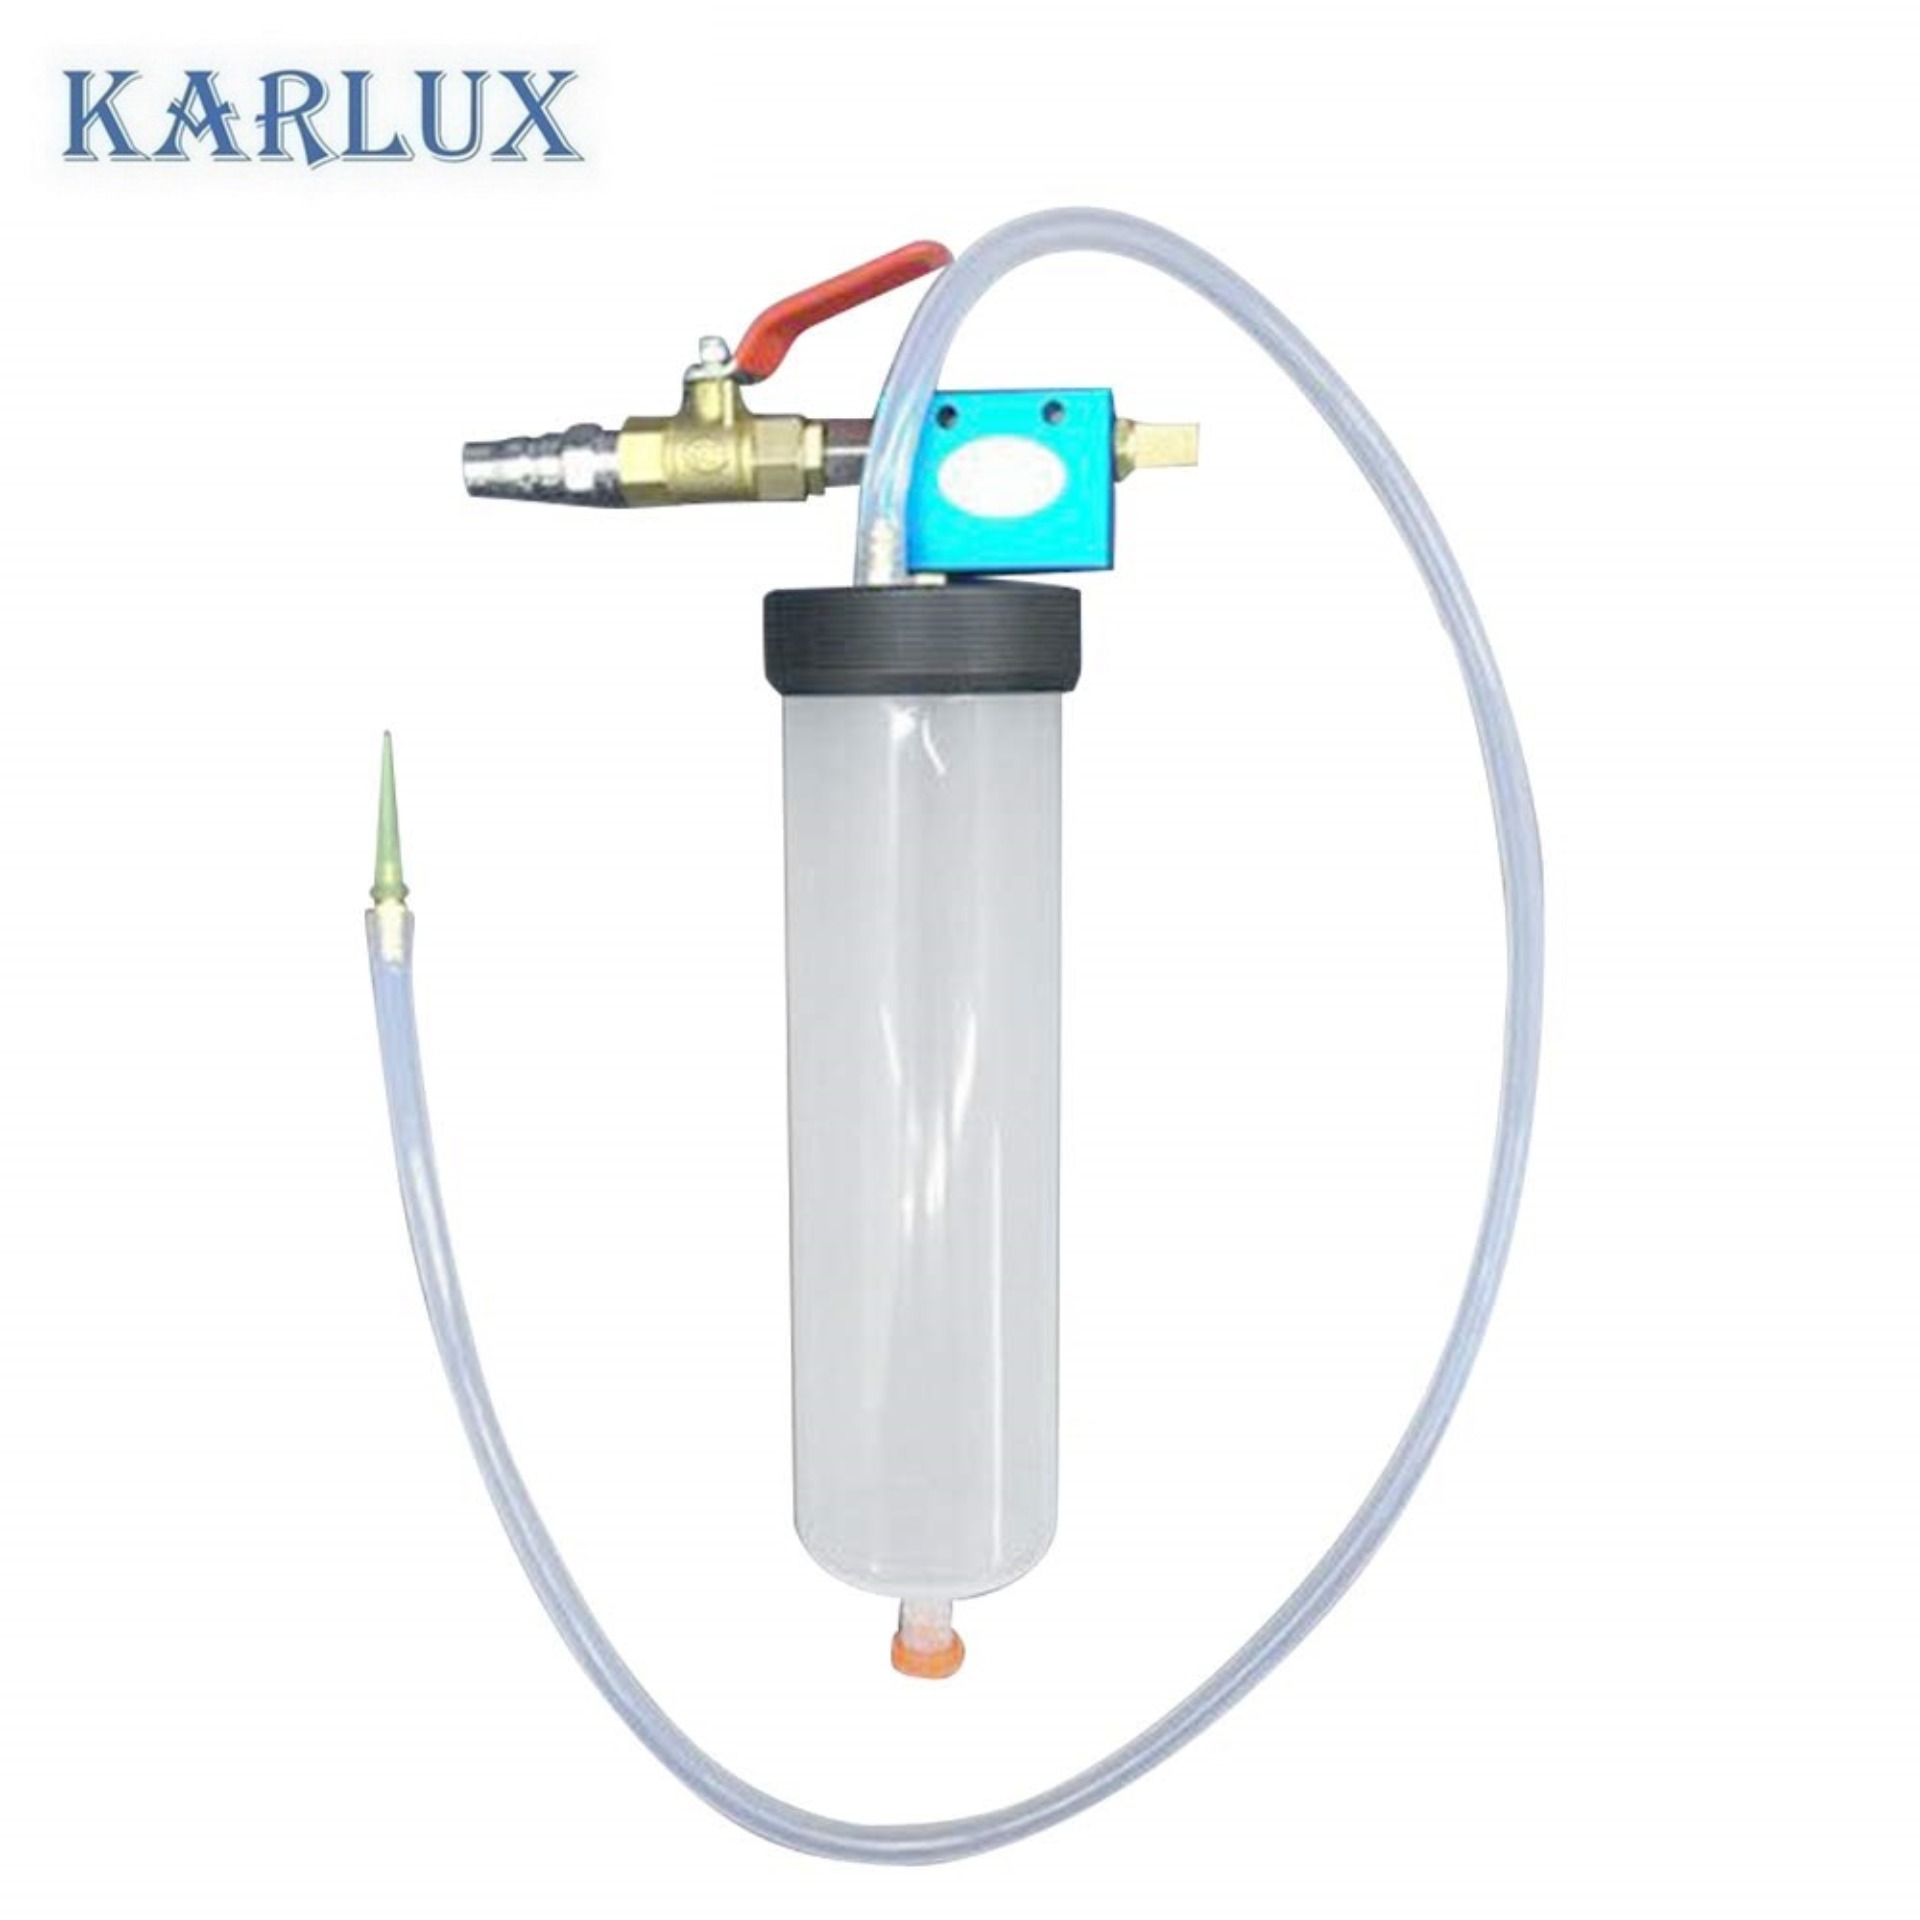 kweiny Pneumatic Fluid Extractor for Replacement of Automotive Brake Fluid and Clutch Fluid and Power Steering Fluid 